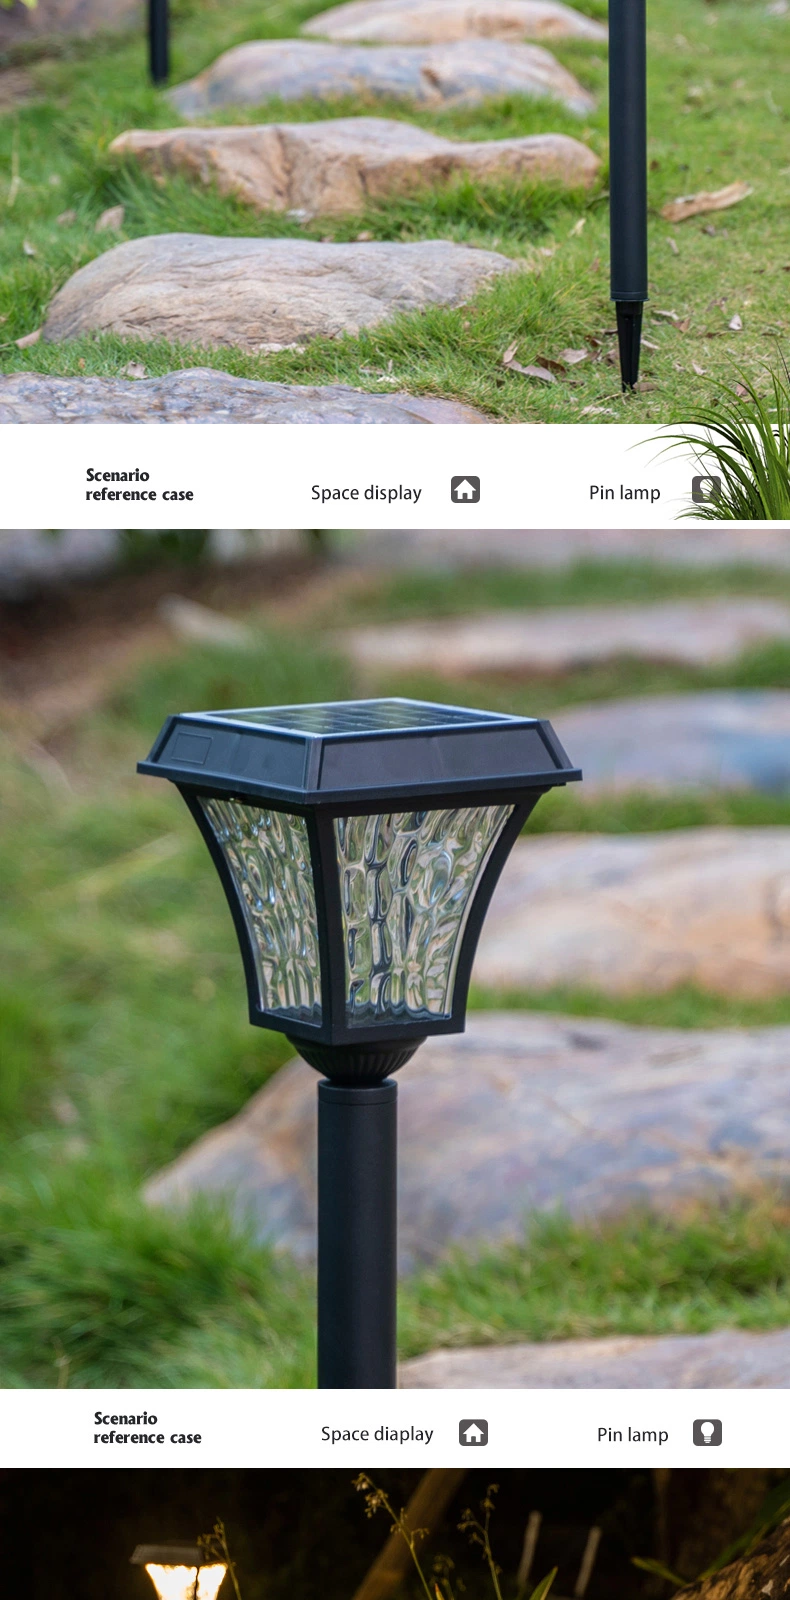 Widely Use LED Spike Lawn Lamp Waterproof Solar Garden Decorate Light